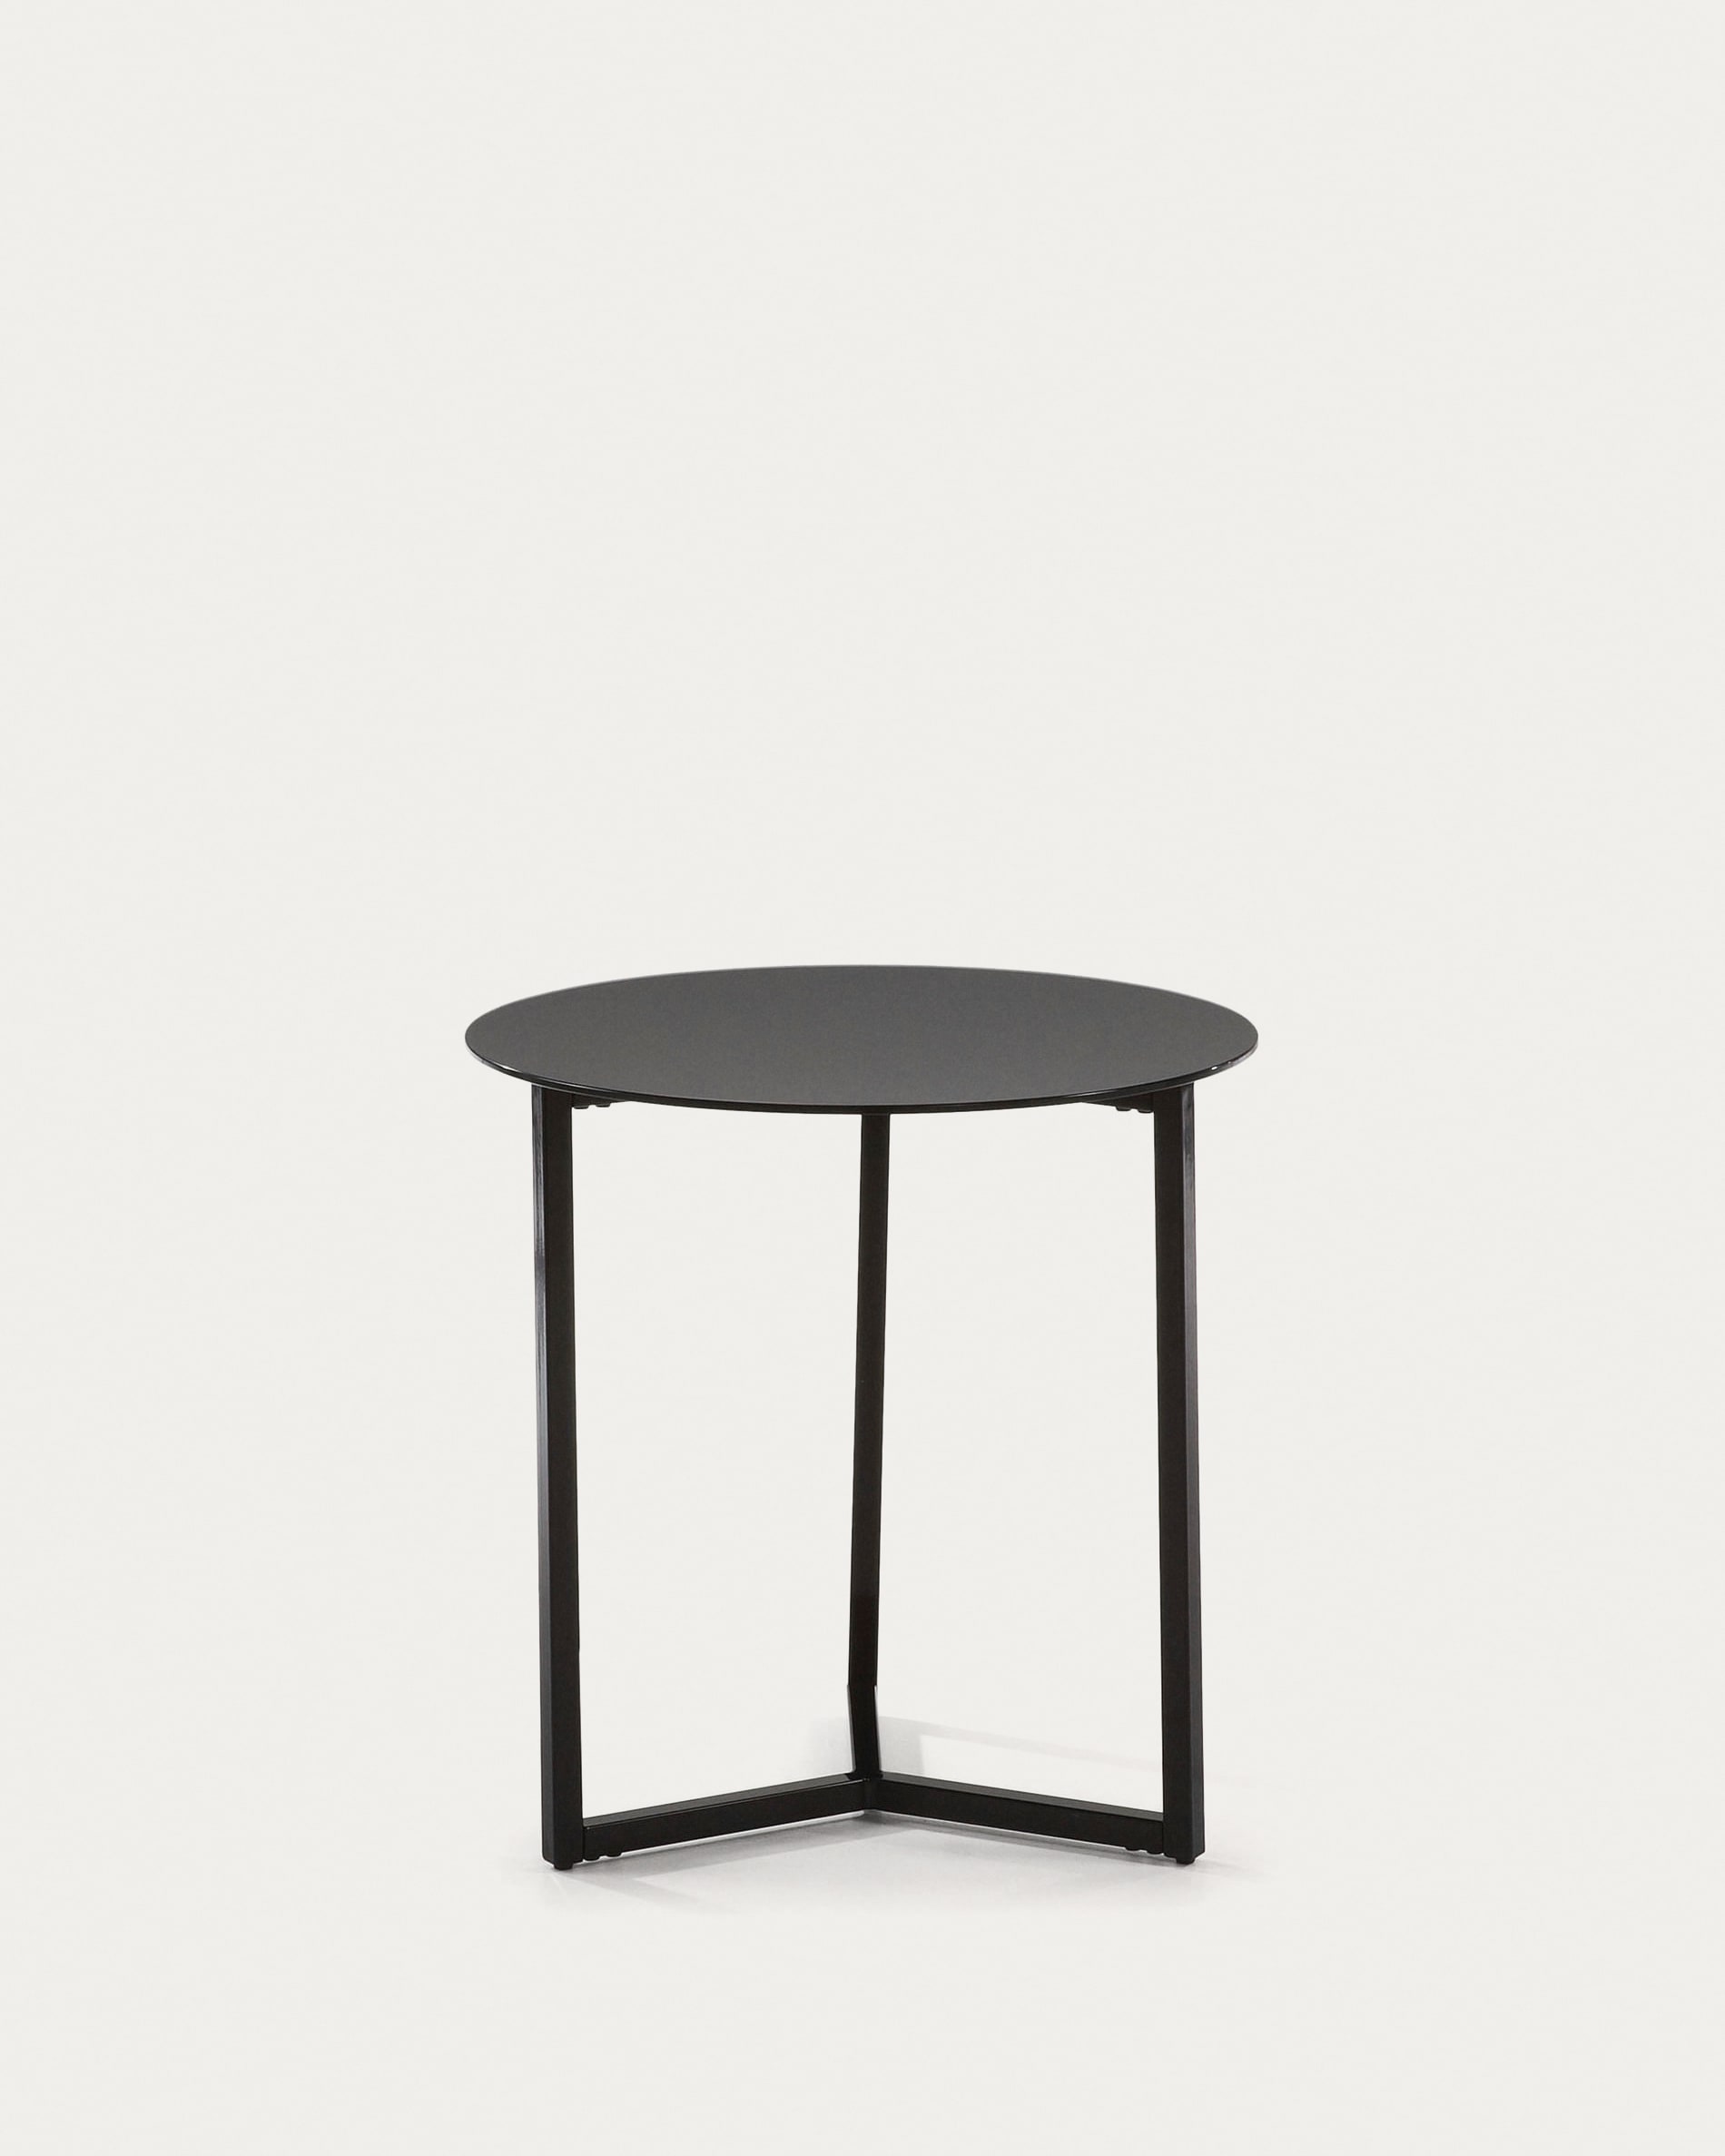 Black Raeam Side Table Made With Tempered Glass And Steel In Black